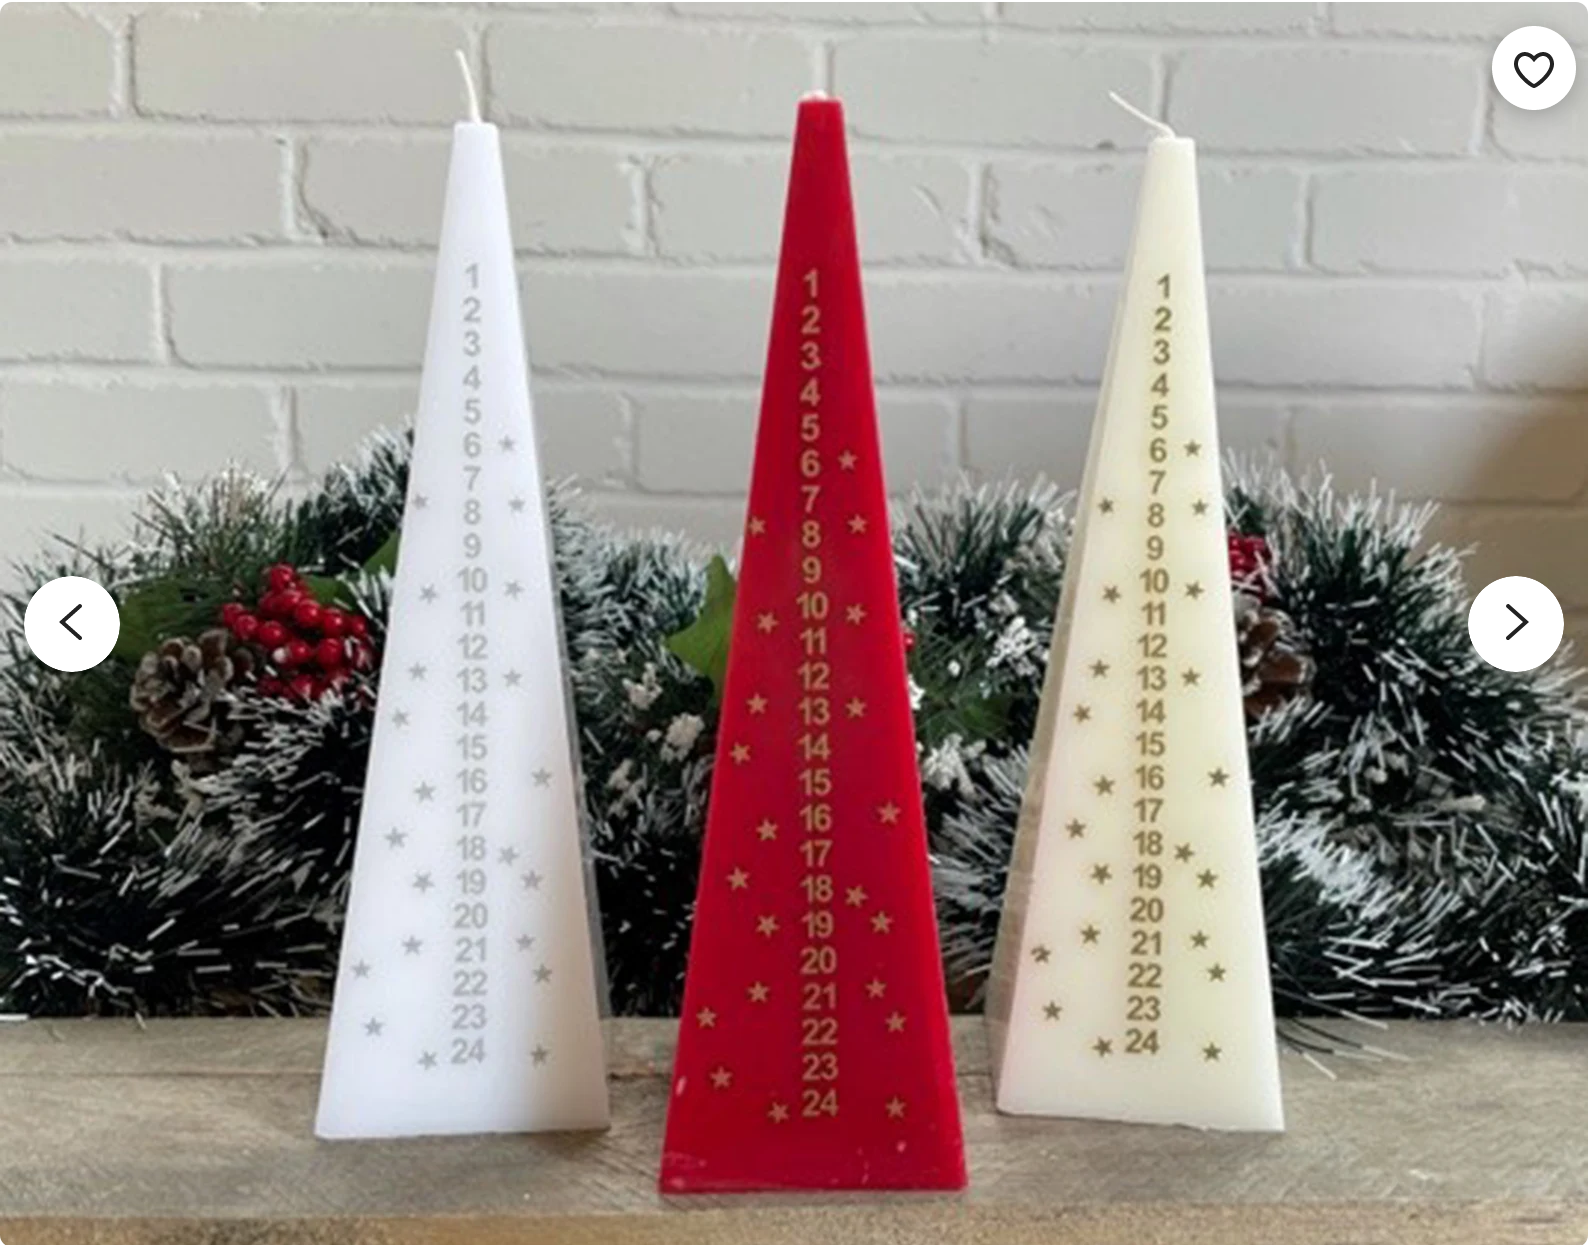 
Advent Christmas Countdown Candle, 21cm Pyramid Shape in Red, Ivory, Or White

$12.81 